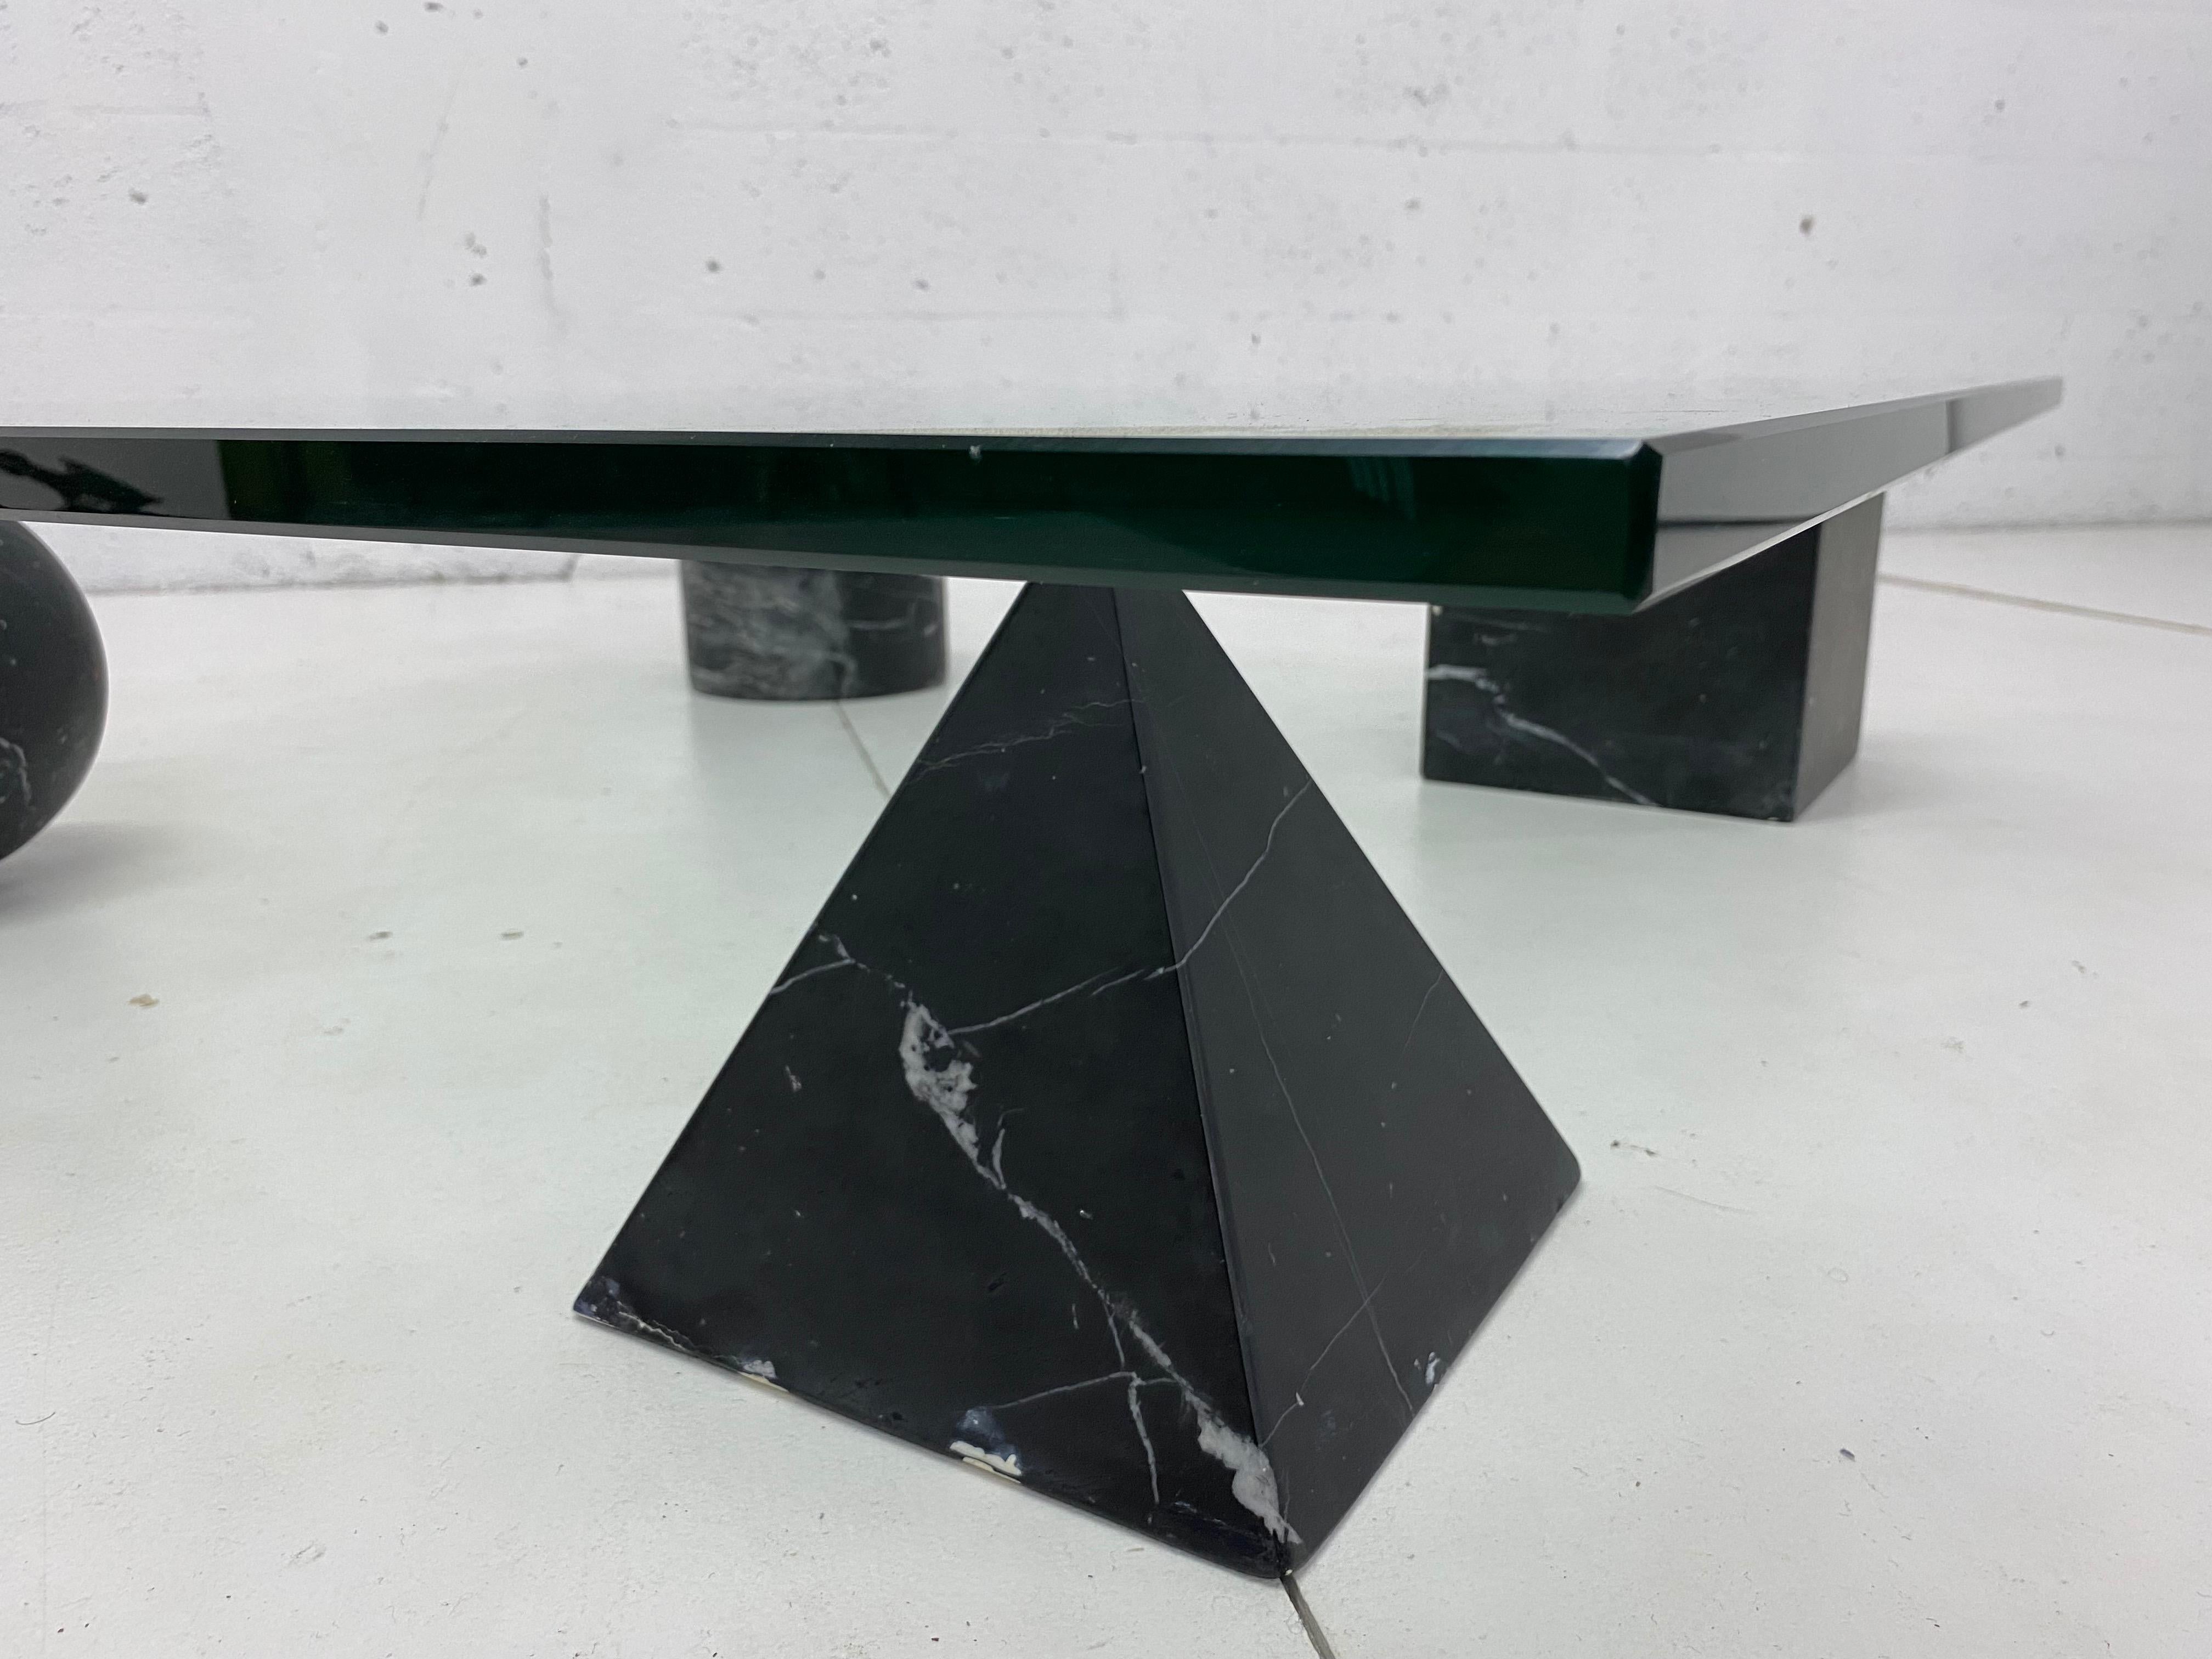 Metafora glass and matte black marble coffee table by Massimo and Lella Vignelli produced by Casigliani, Italy, circa 1979. Table consists of four different shaped marble legs that support a 3/4